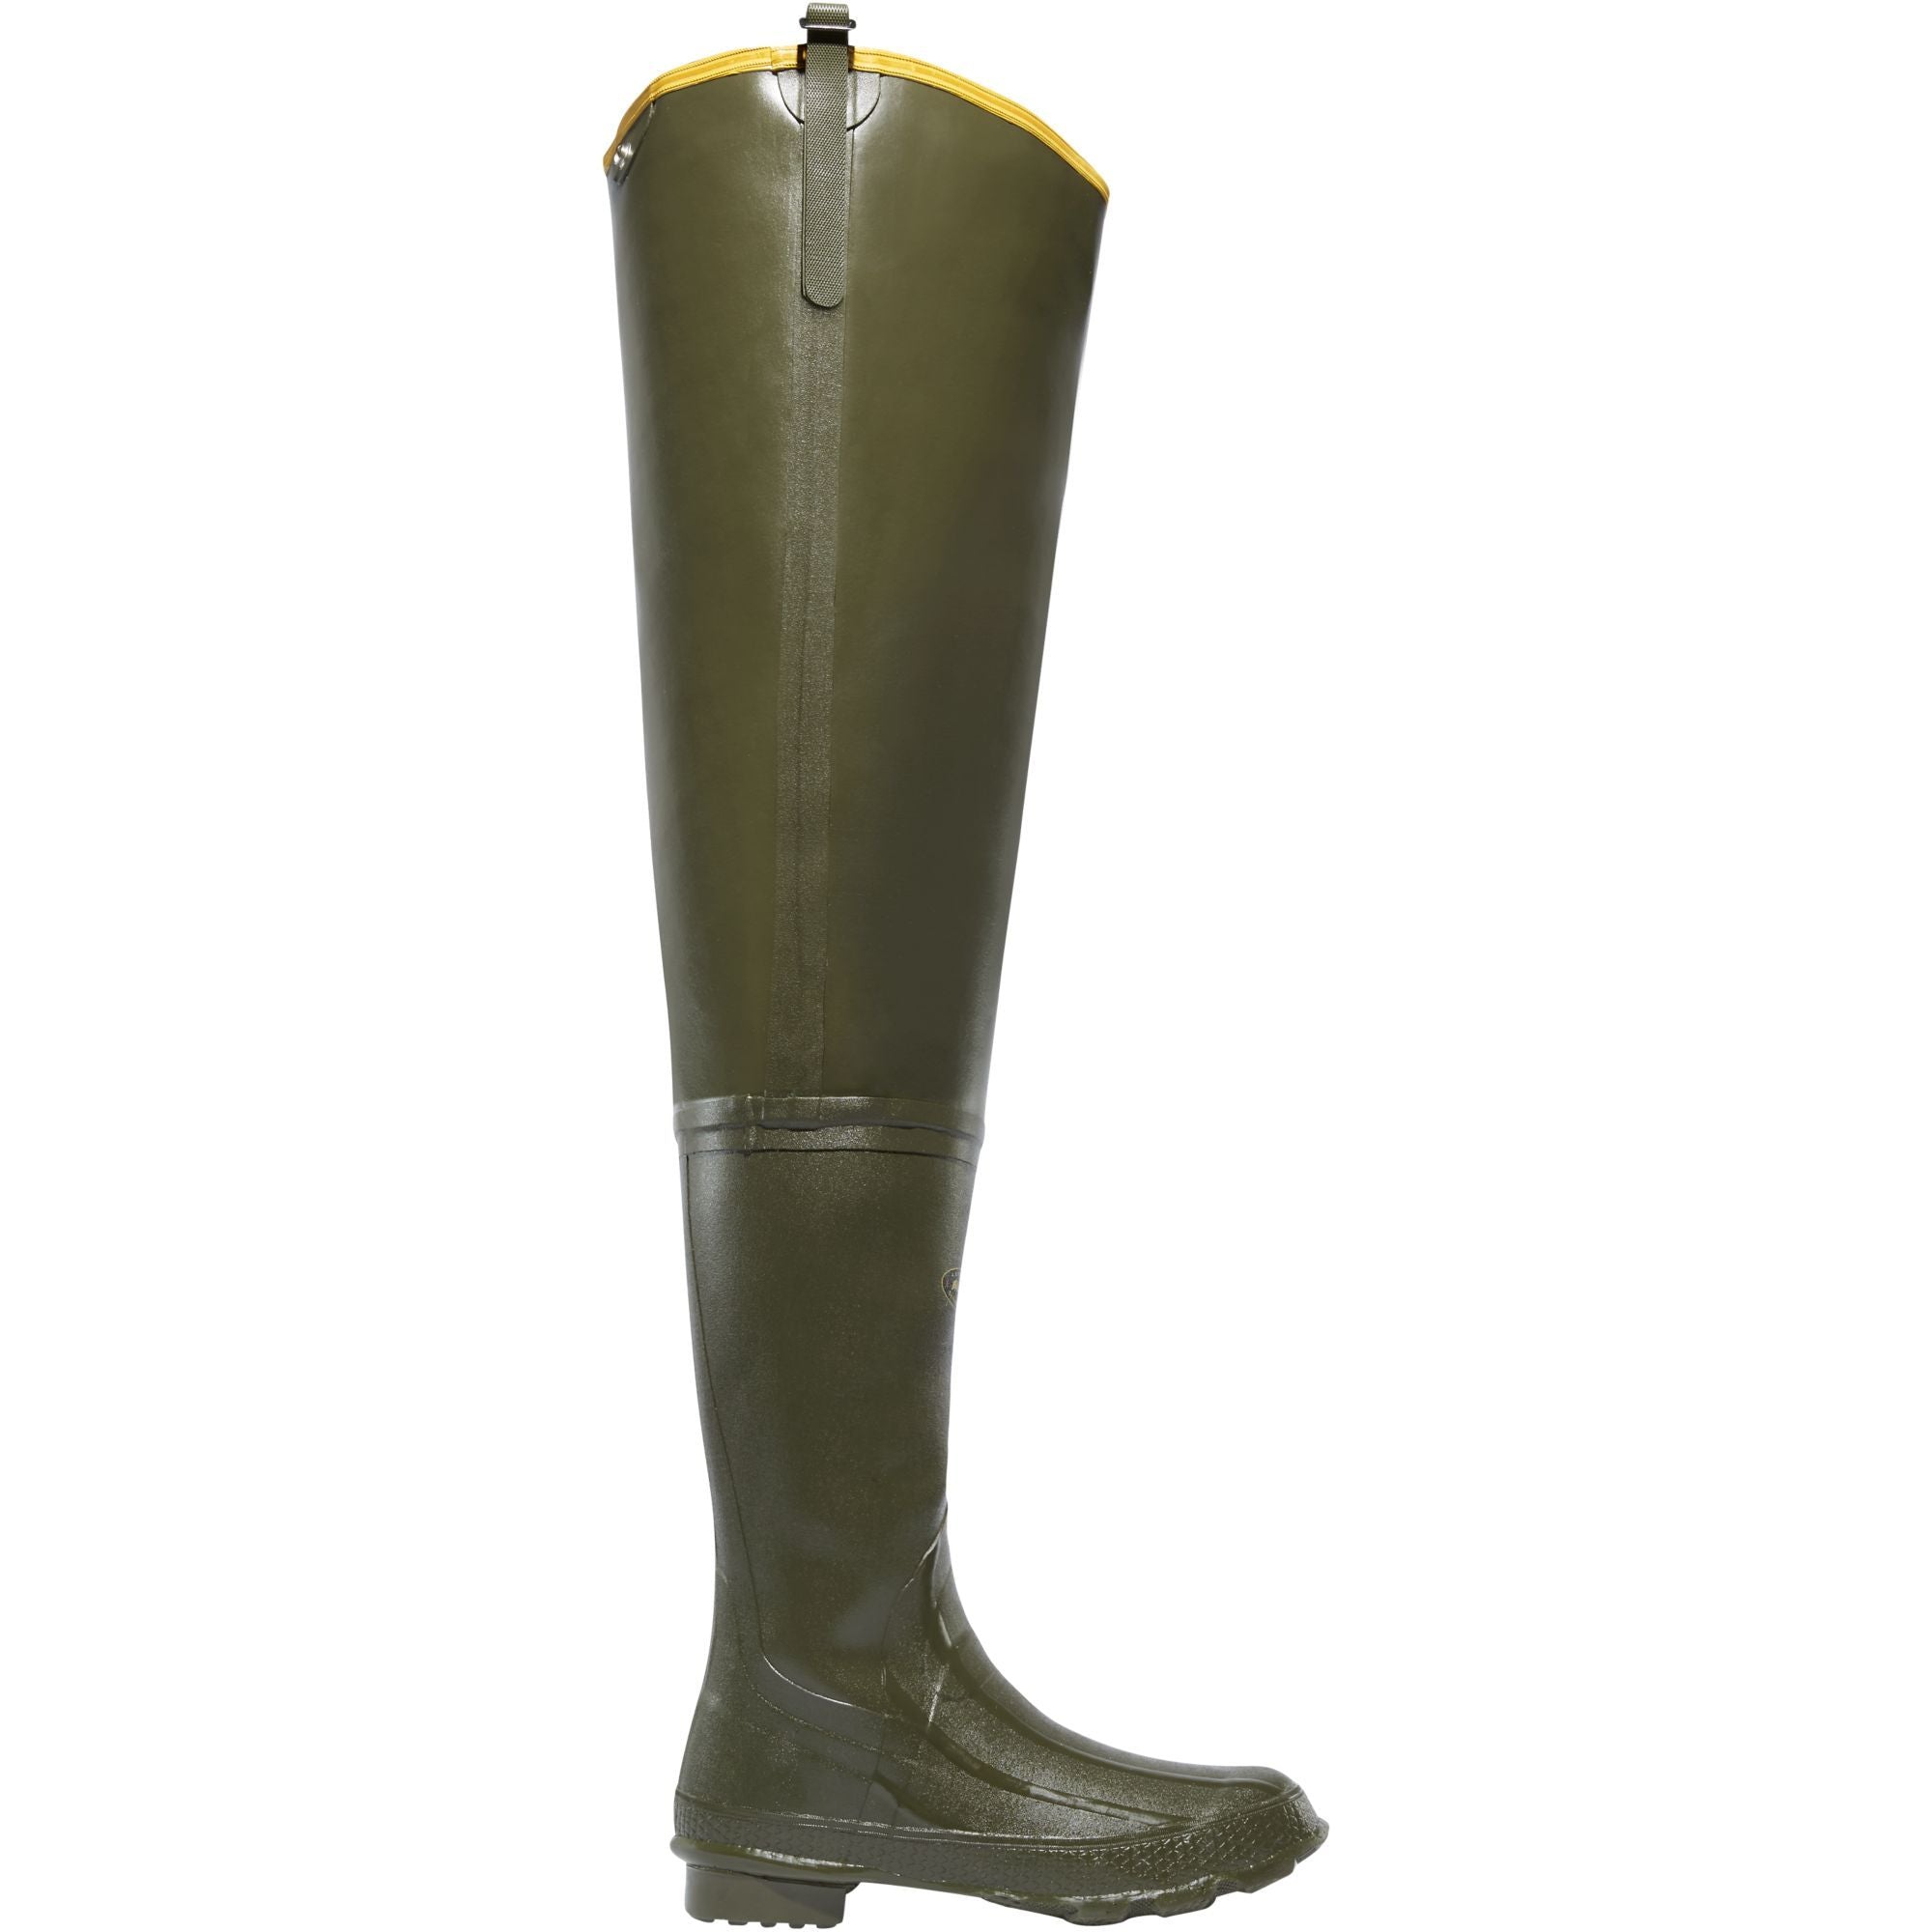 Aggressor Men's Insulated Rubber Boots - Green